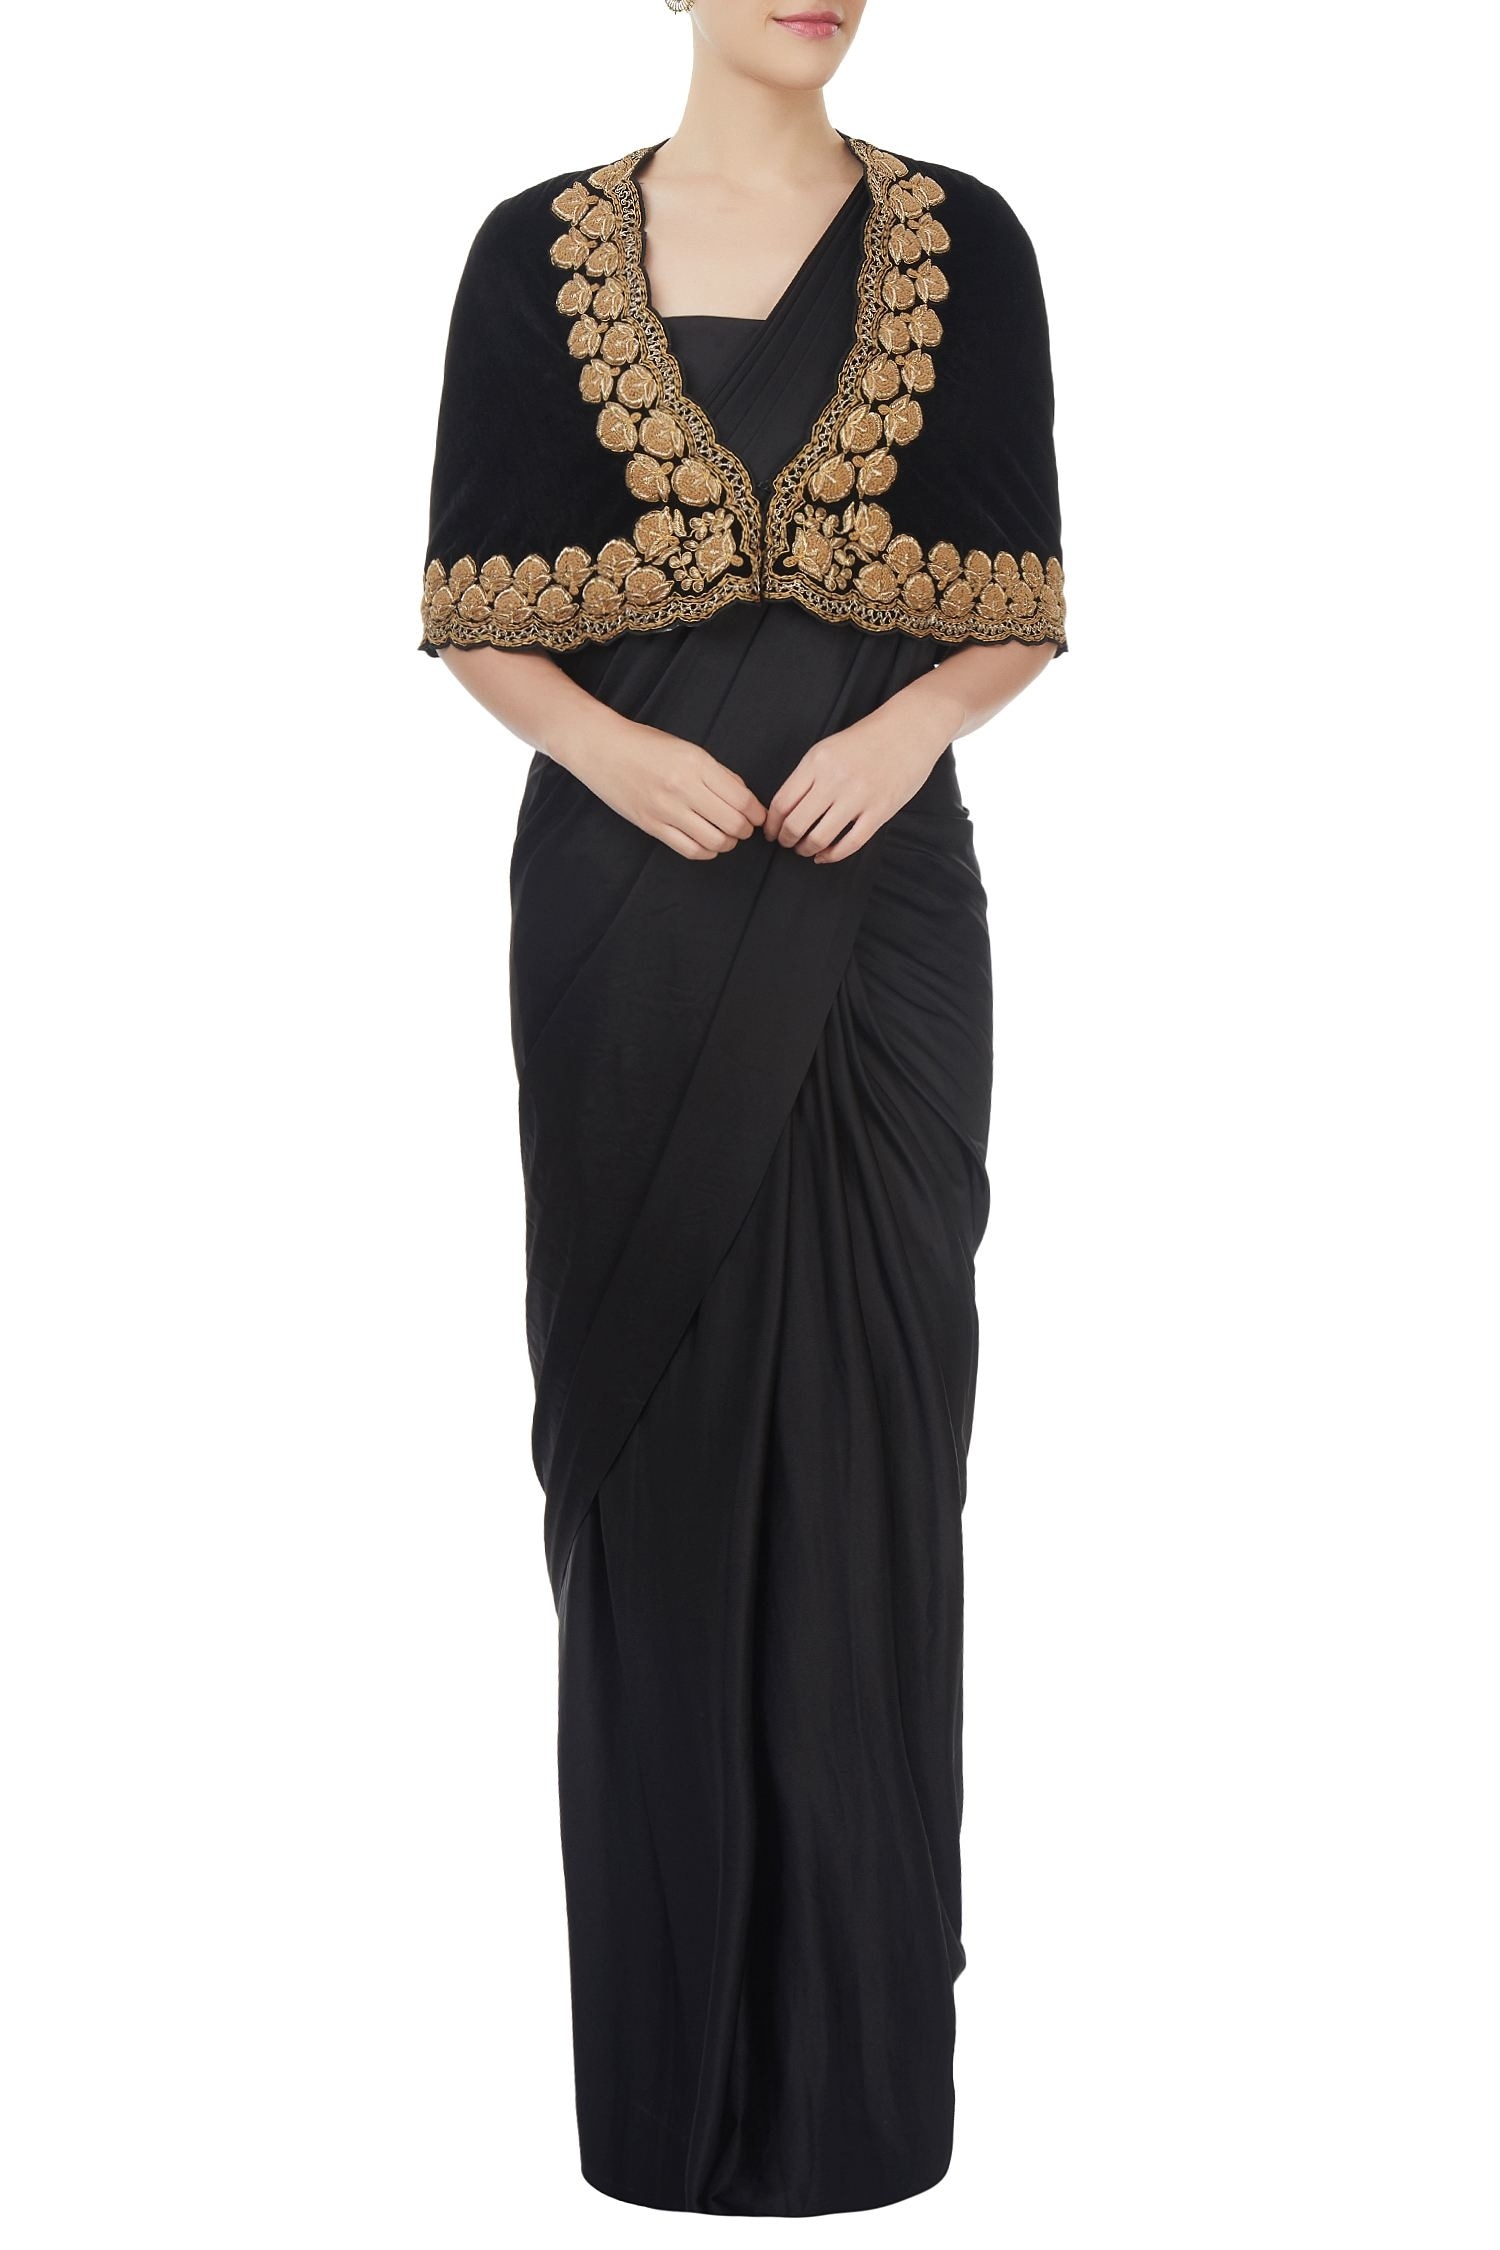 J by Jannat Black Embroidered Zardozi Strapless Pre-draped Saree And Cape Set For Women